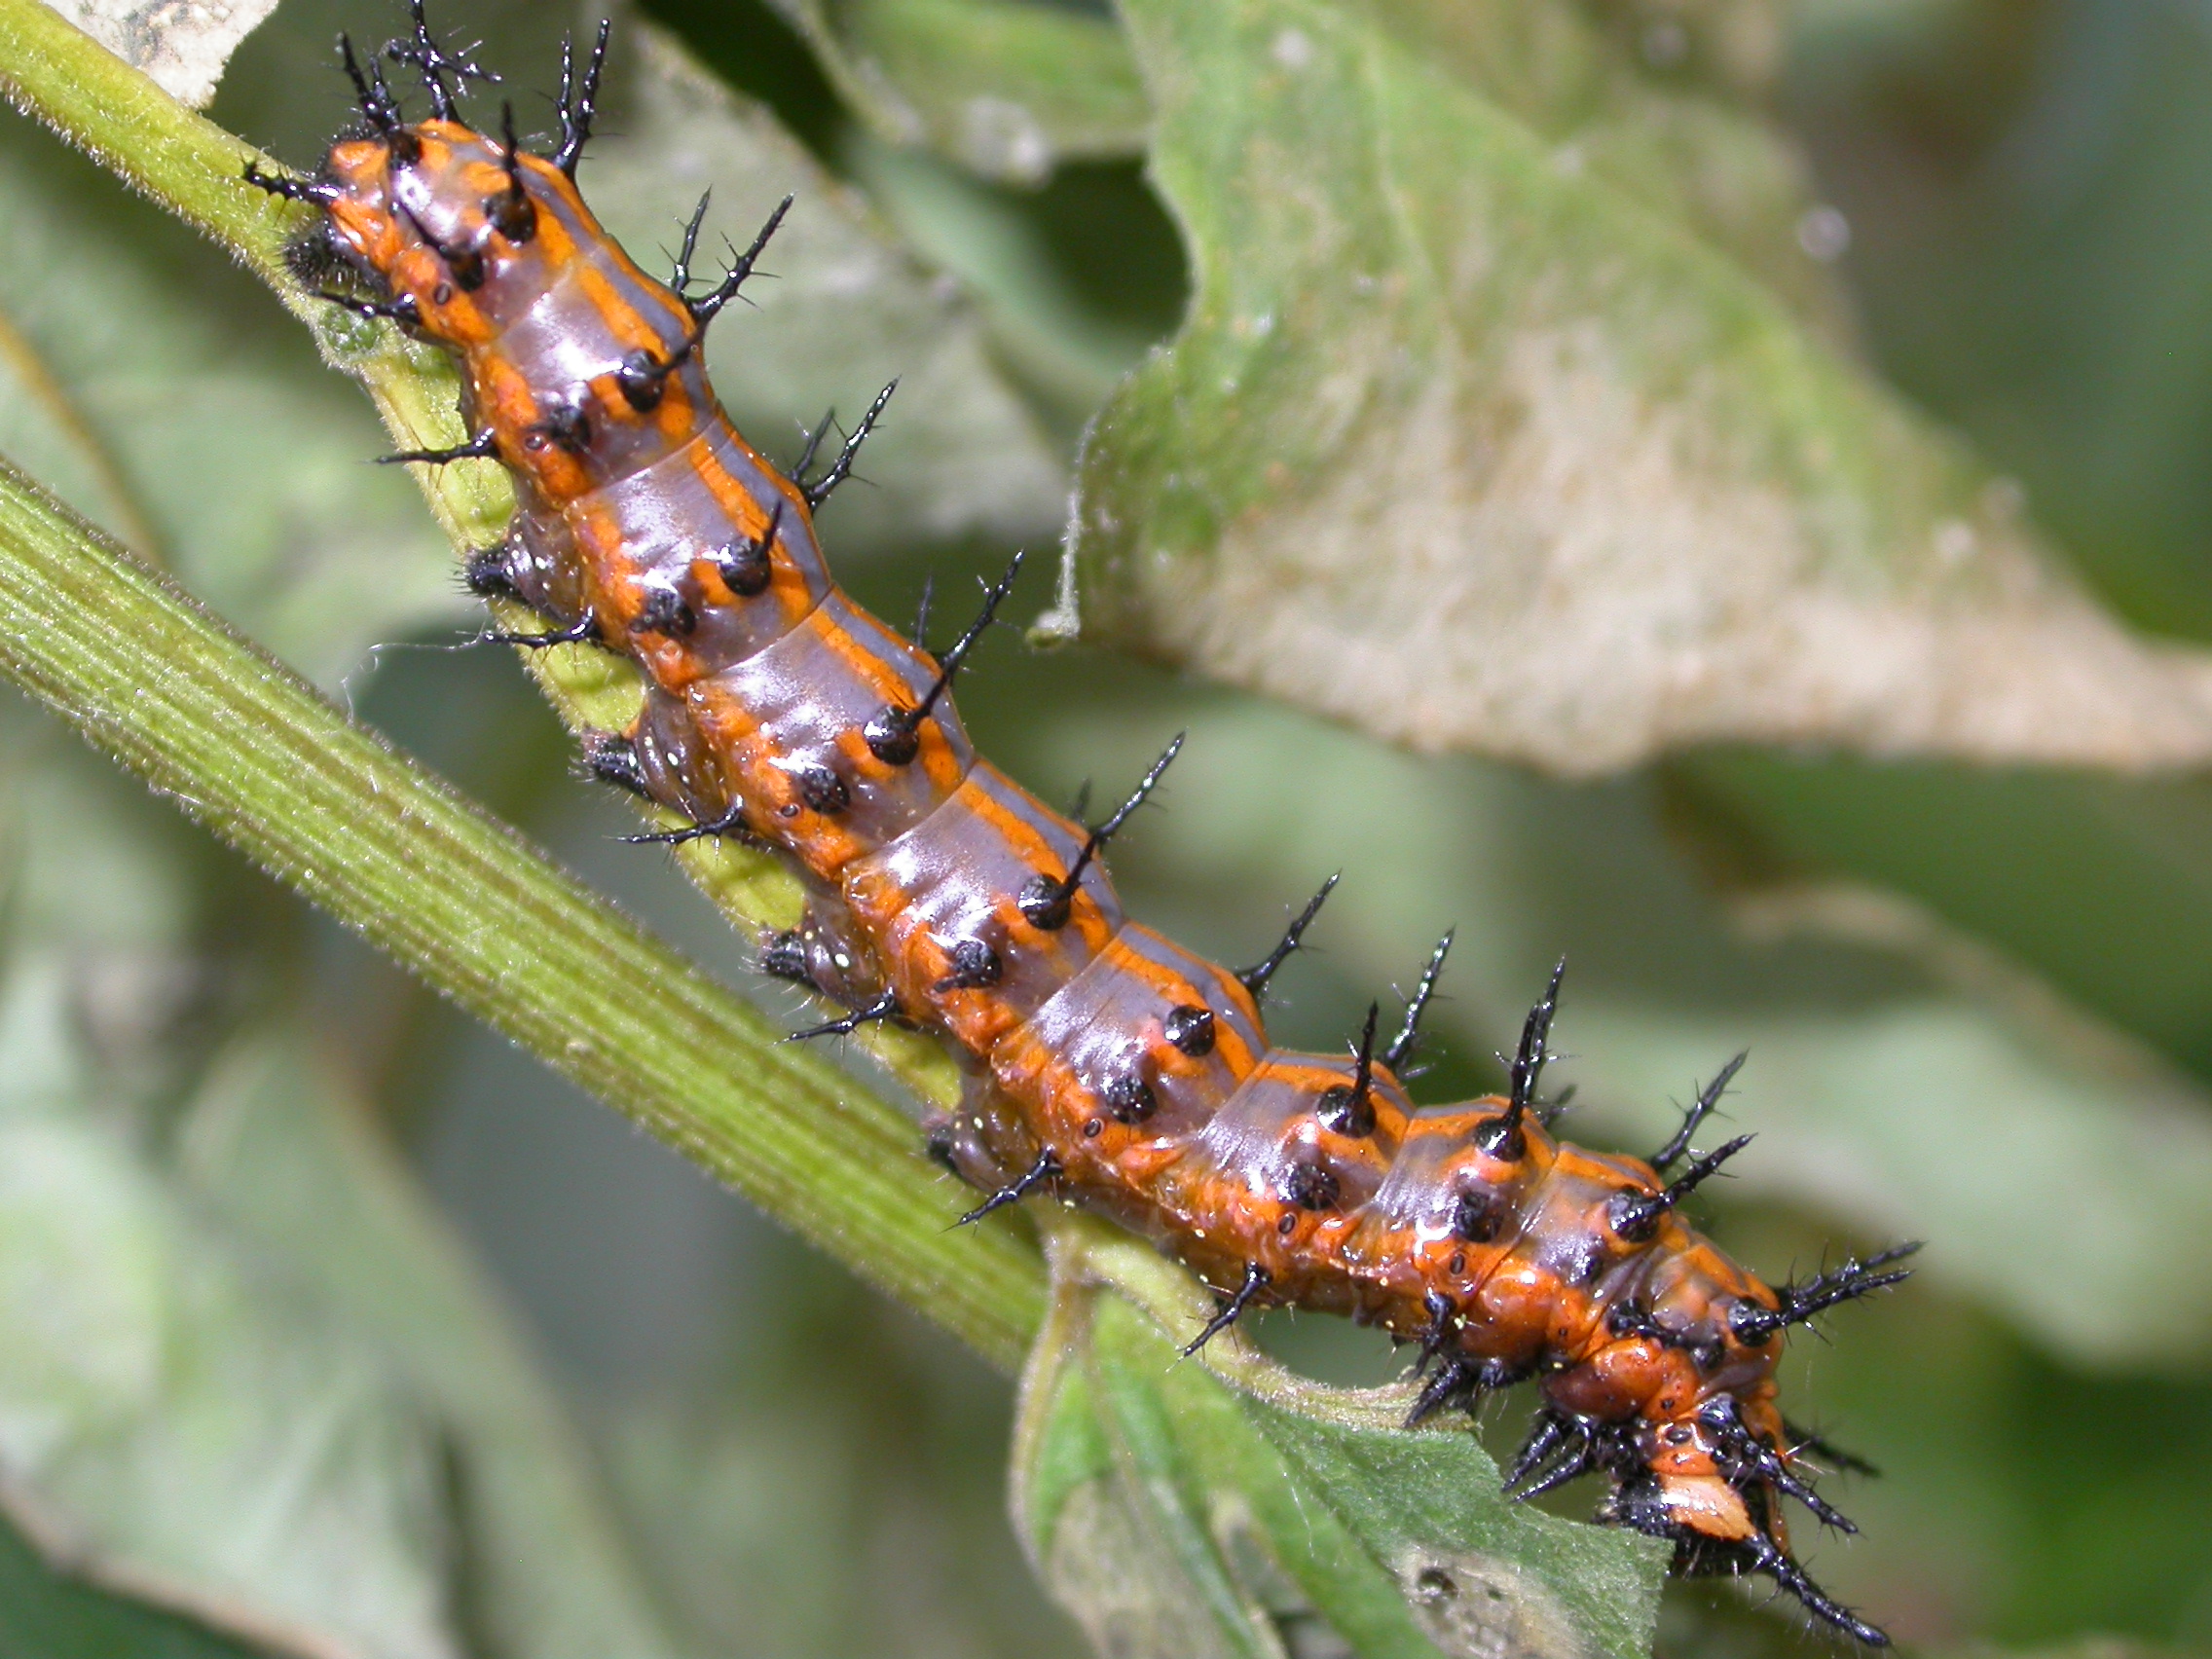 The caterpillar stage of a Gulf fritillary (Agraulis vanillae) is brilliant orange  with greenish stripes and black spines as shown here from Marjorie Harris Carr Cross Florida Greenway.